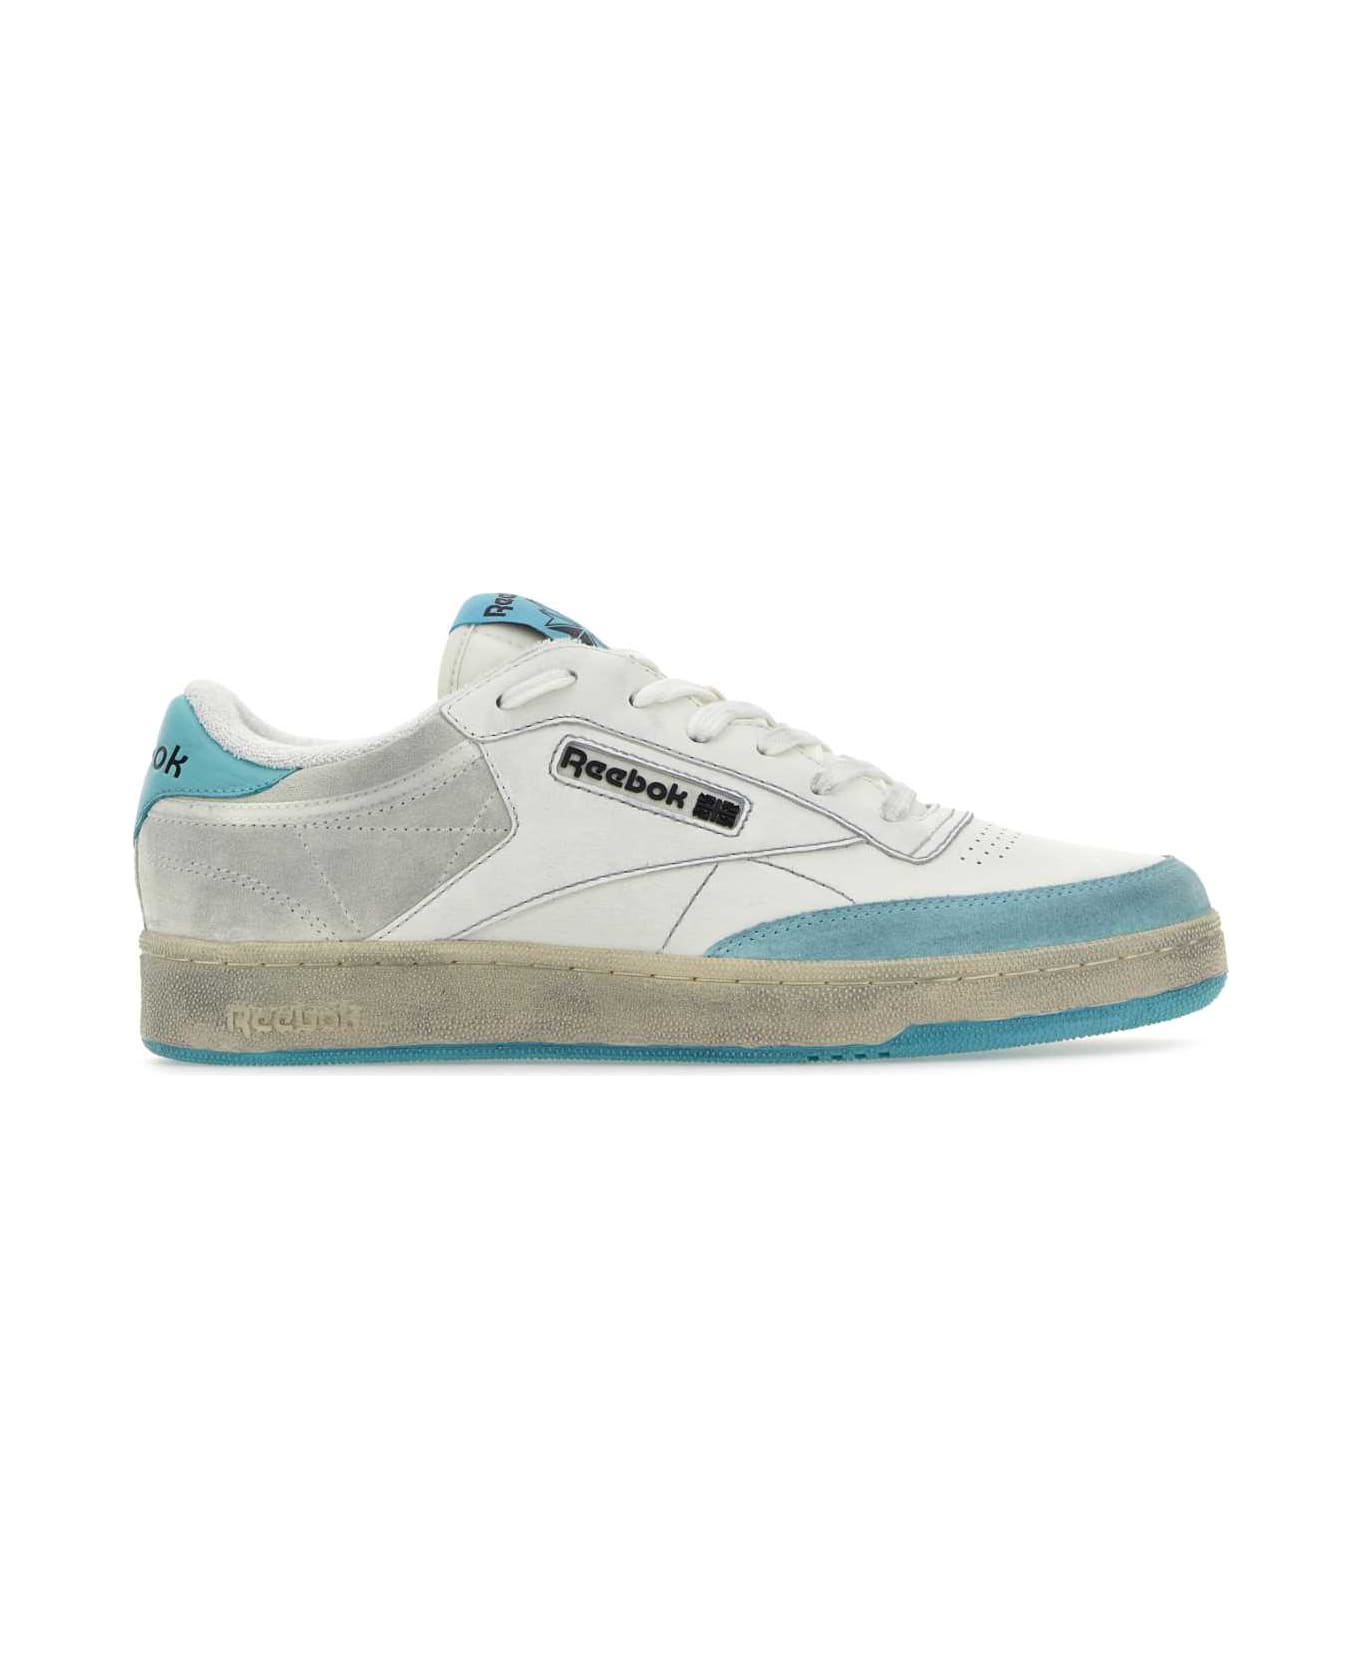 Reebok Two-tone Leather And Suede Club C Sneakers - WHITELIGH スニーカー